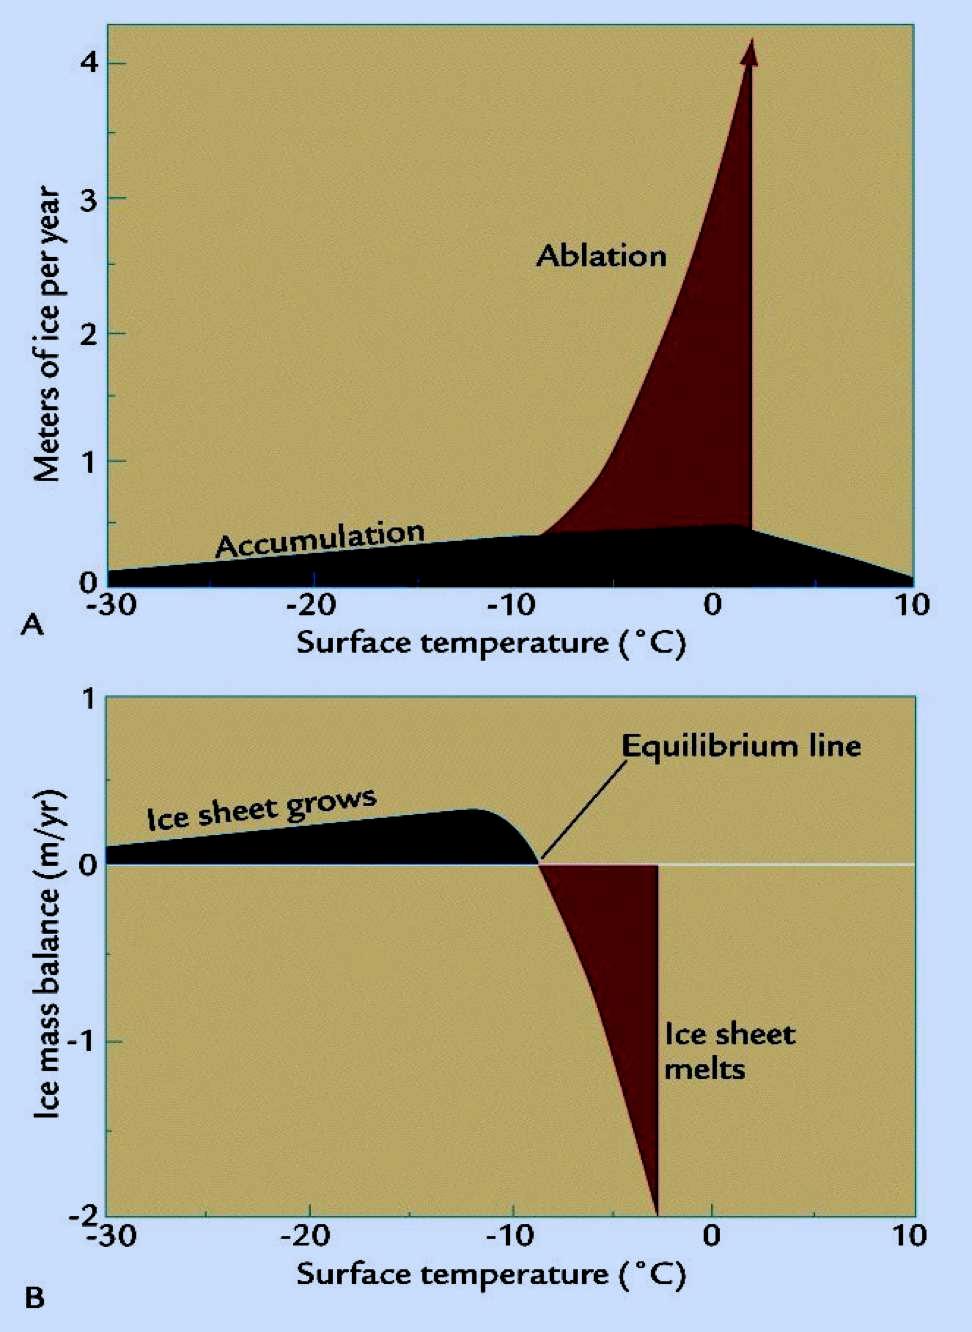 Temperature and Ice Mass Balance Rule of thumb is that 1C warming